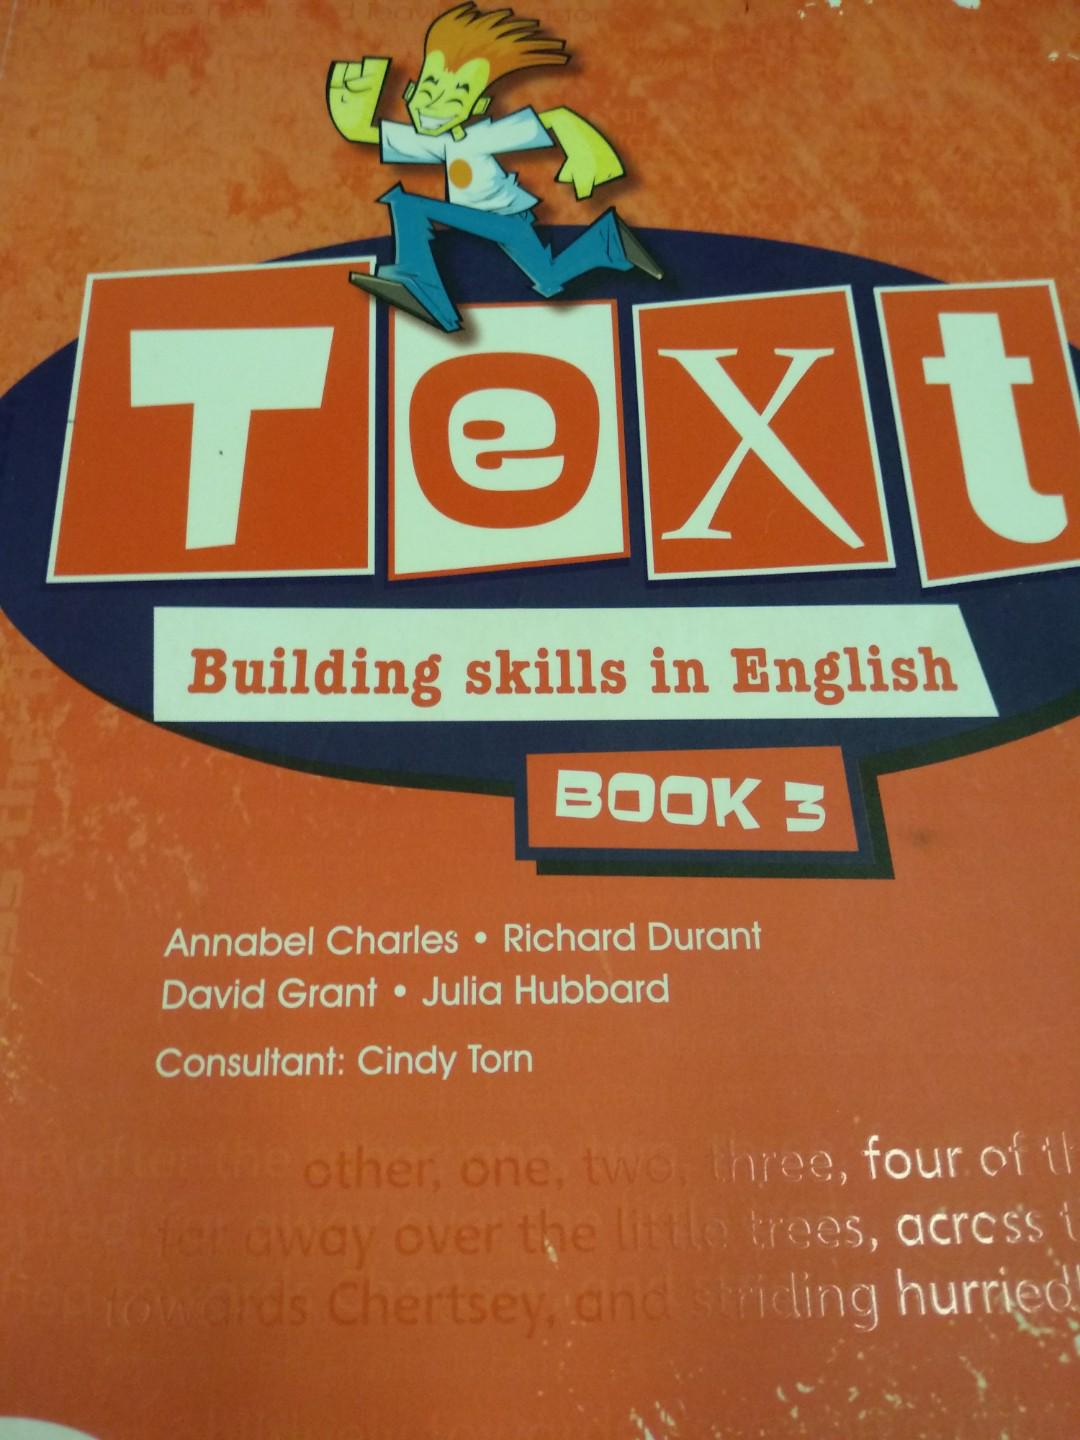 igcse-year-9-building-skills-in-english-hobbies-toys-books